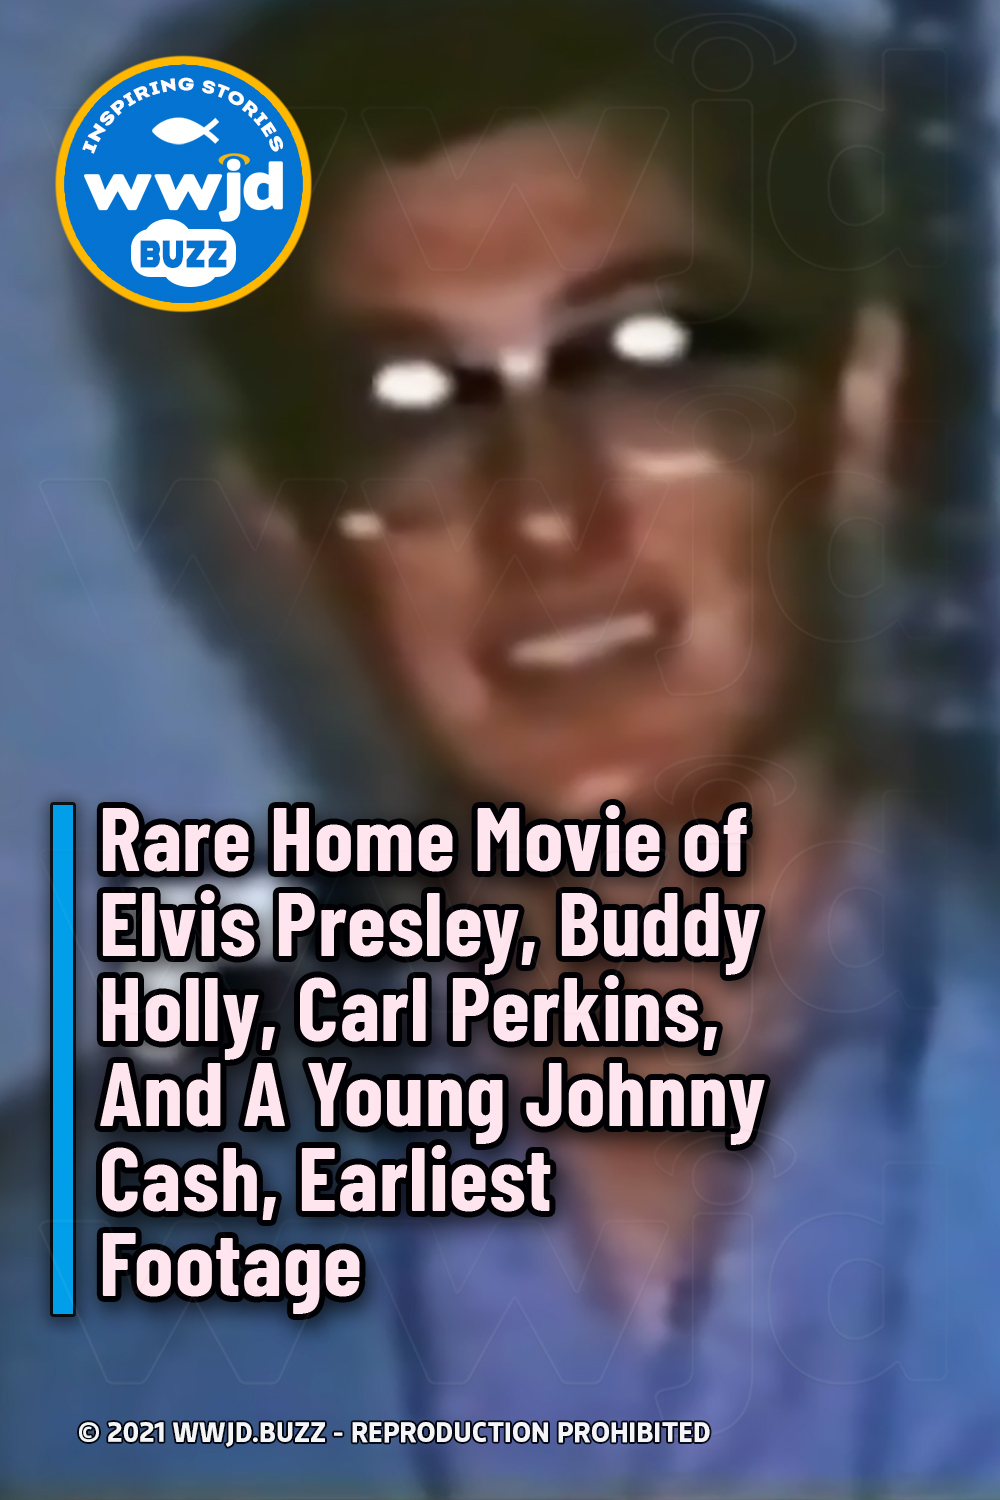 Rare Home Movie of Elvis Presley, Buddy Holly, Carl Perkins, And A Young Johnny Cash, Earliest Footage